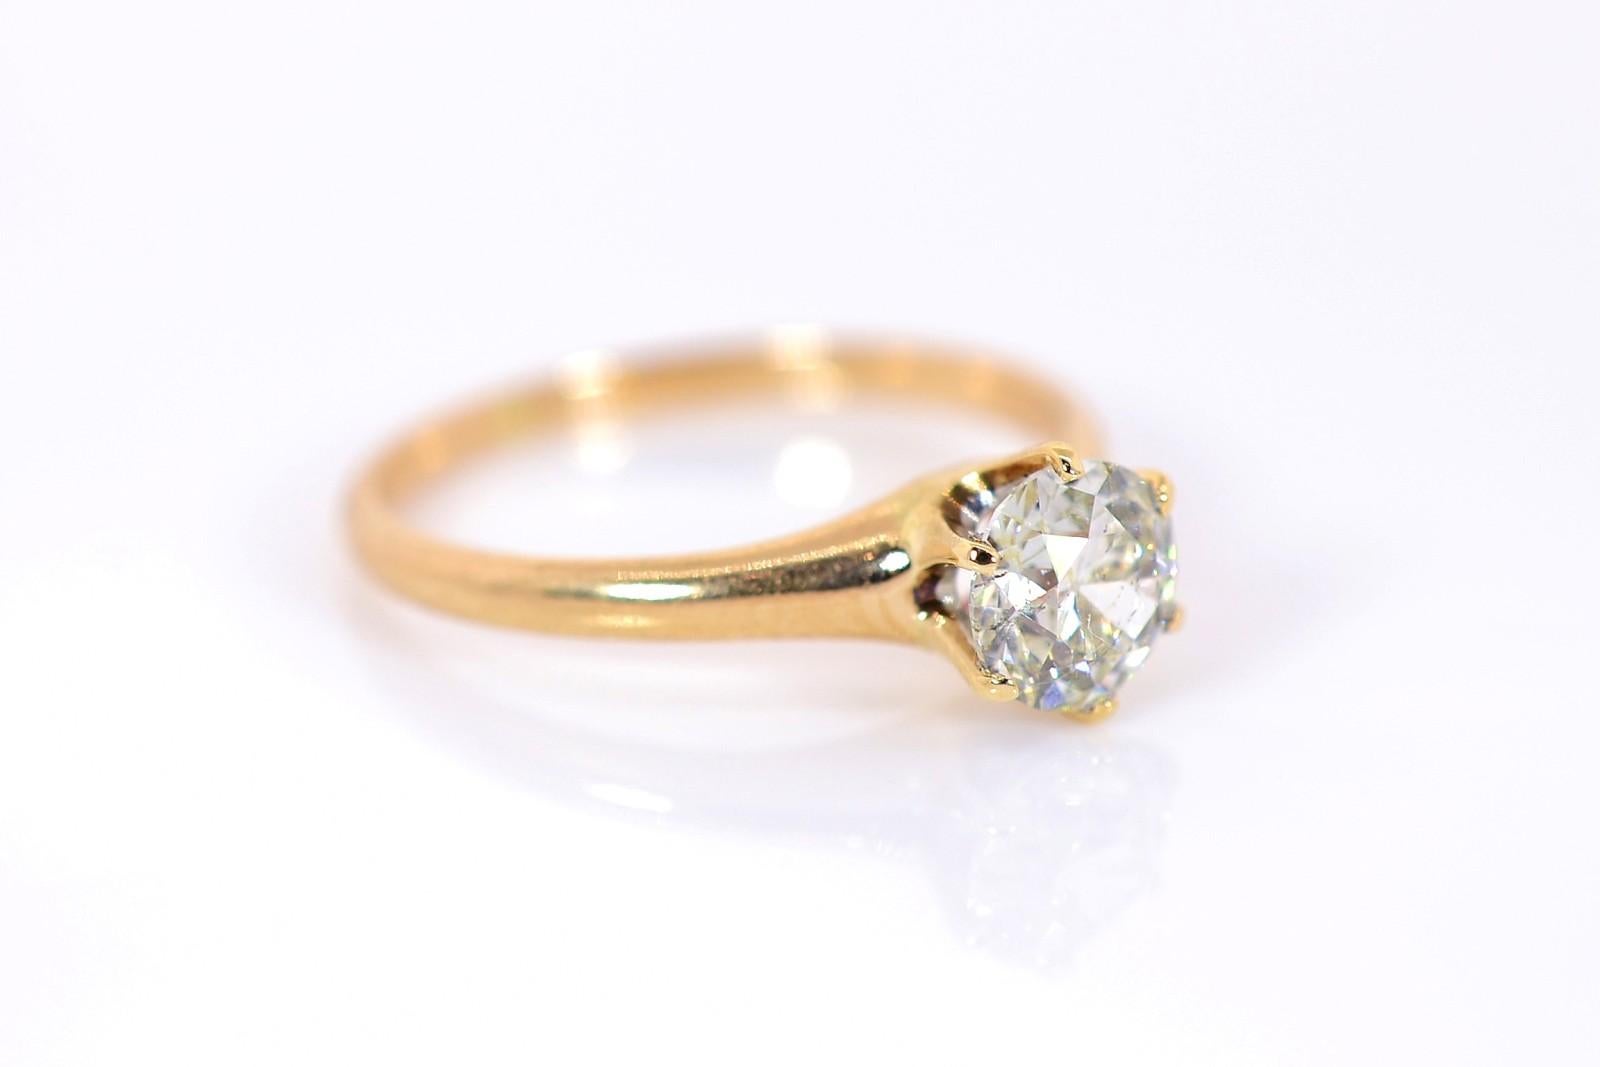 The quintessential engagement ring.  This 1920's 14KT yellow gold ring showcases a gorgeous 0.80 carat Old European cut Diamond of I color - SI3 clarity.  The six prong setting is lined with platinum under the diamond, an extra high quality detail